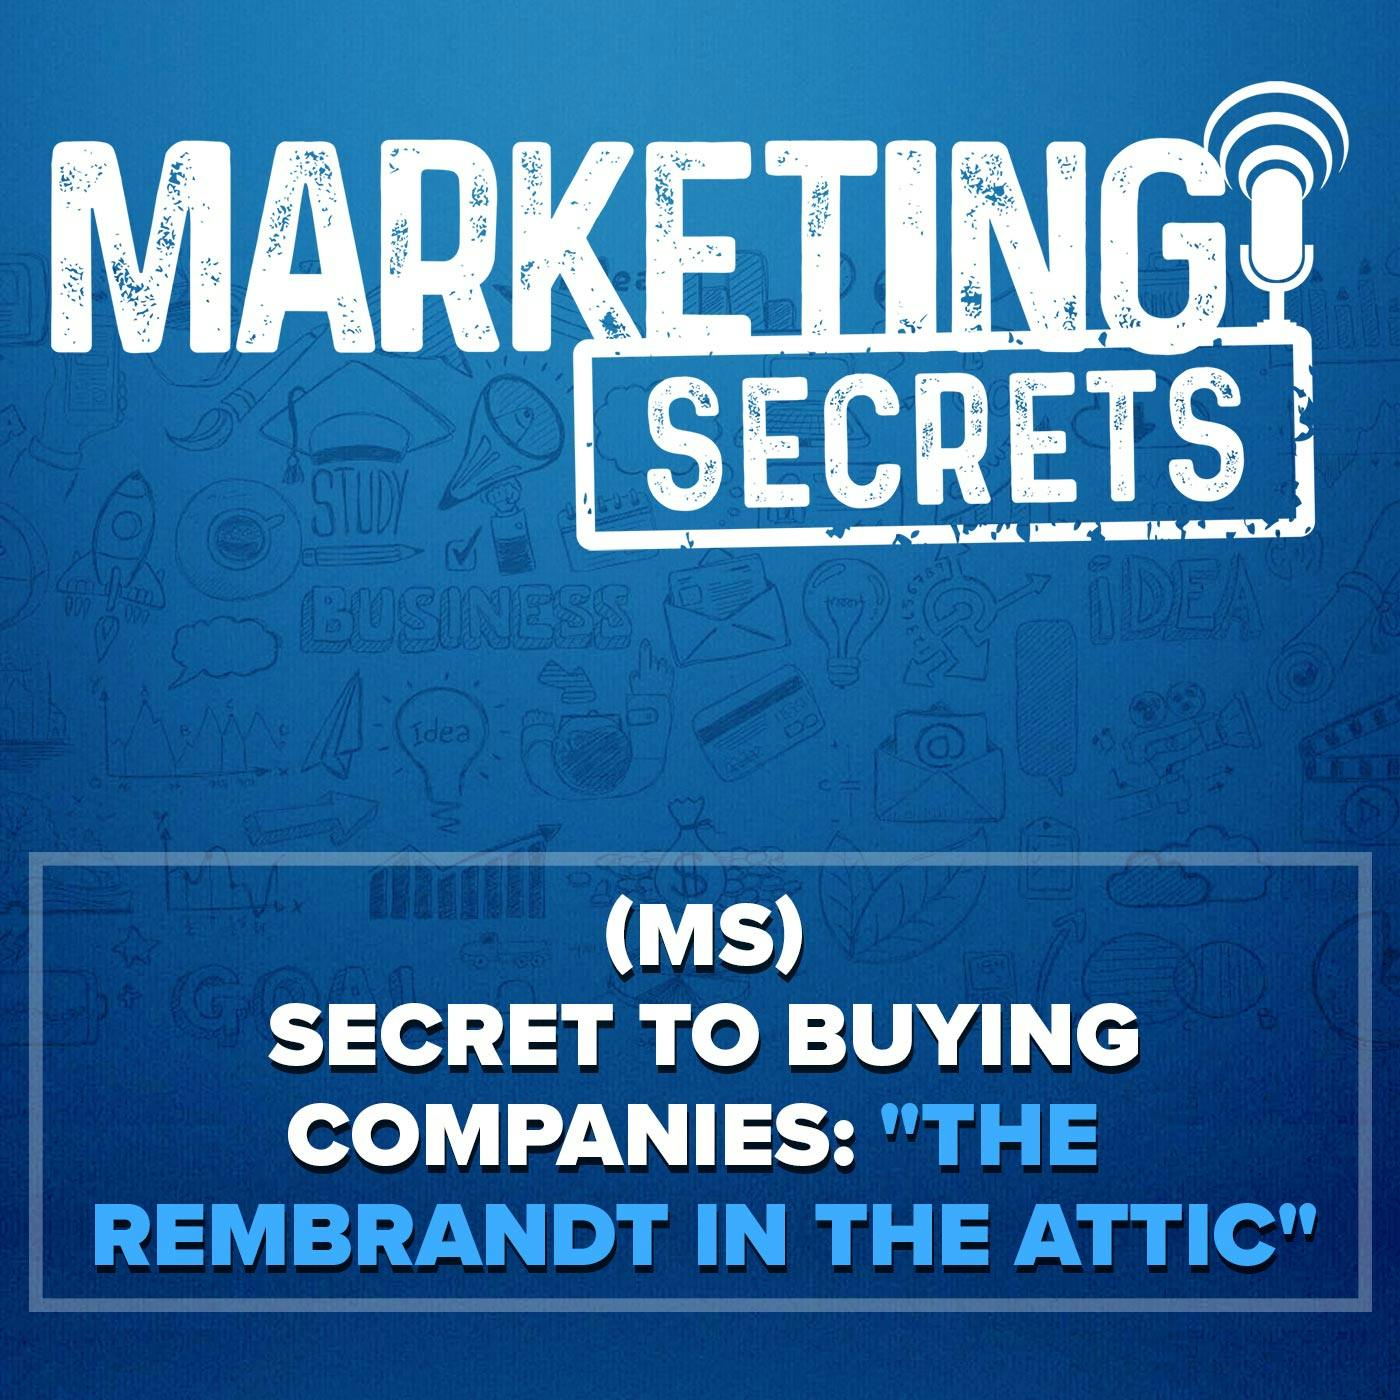 (MS) Secret to Buying Companies: "The Rembrandt in the Attic"